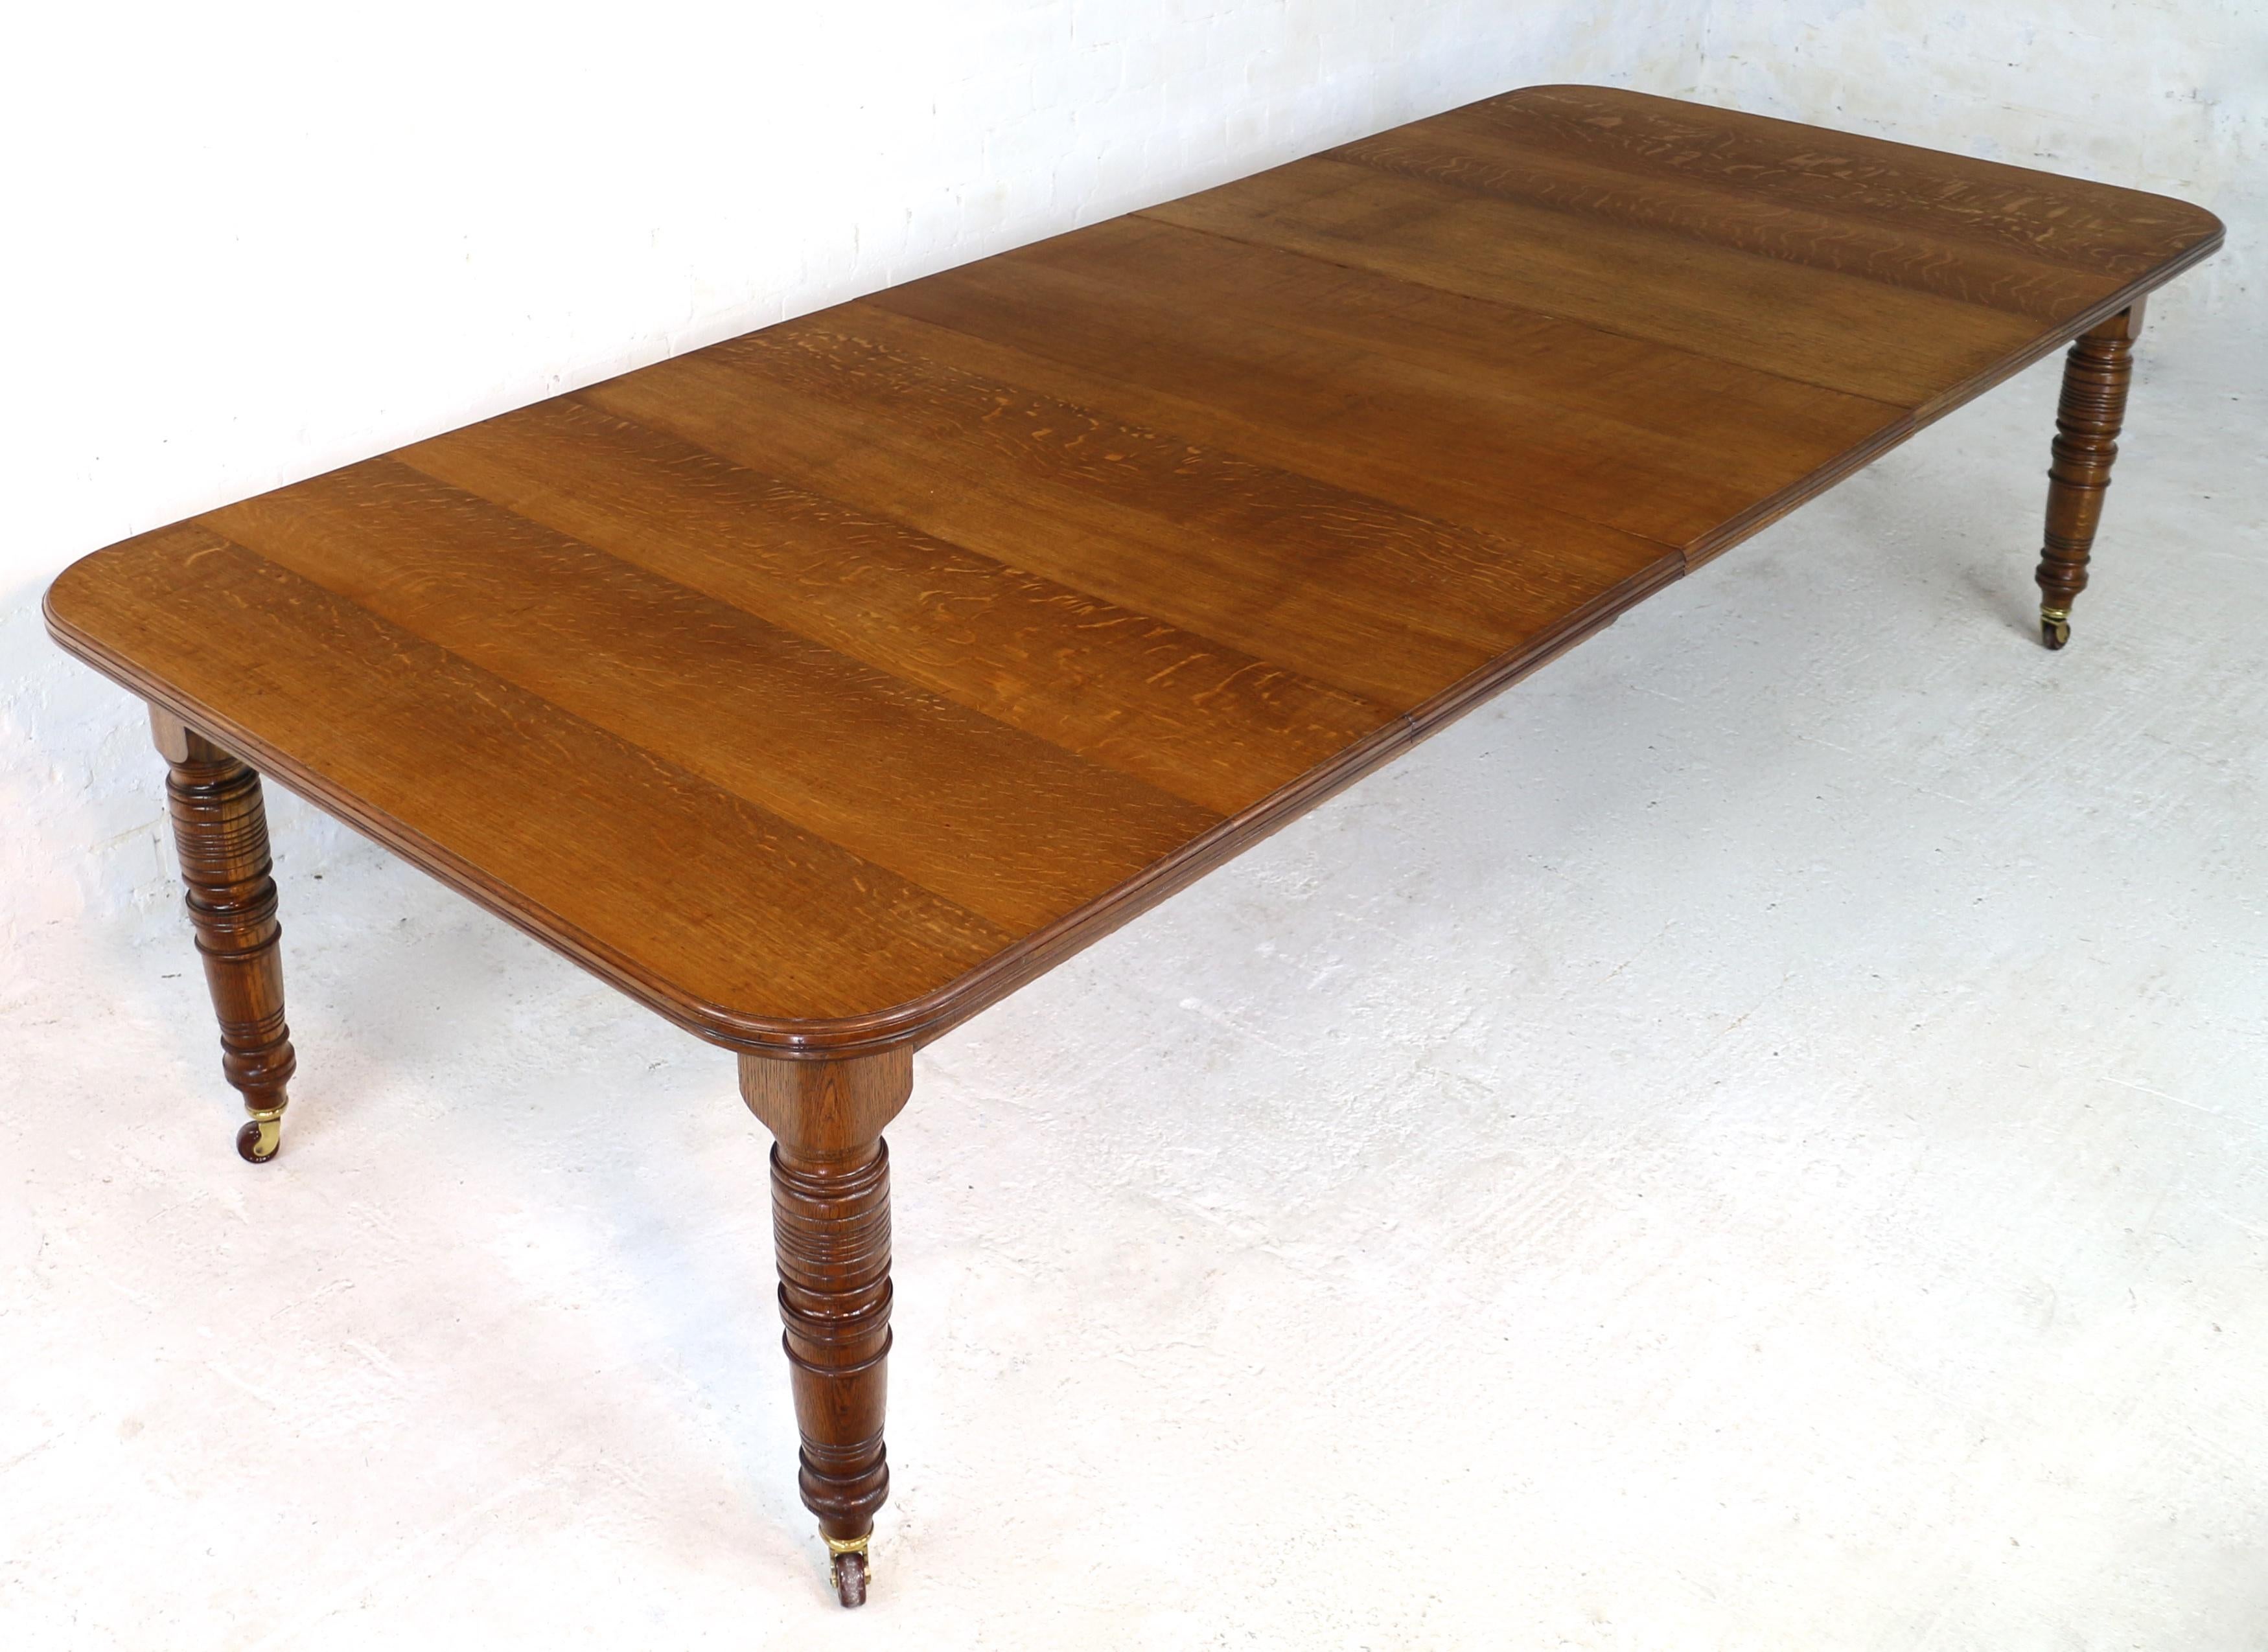 An attractive mid Victorian wind-out extending dining table in quarter-sawn oak and dating to circa 1870. With a rectangular top with rounded corners and a moulded edge it stands on four Arts & Crafts style ring-turned tapering legs with brass caps